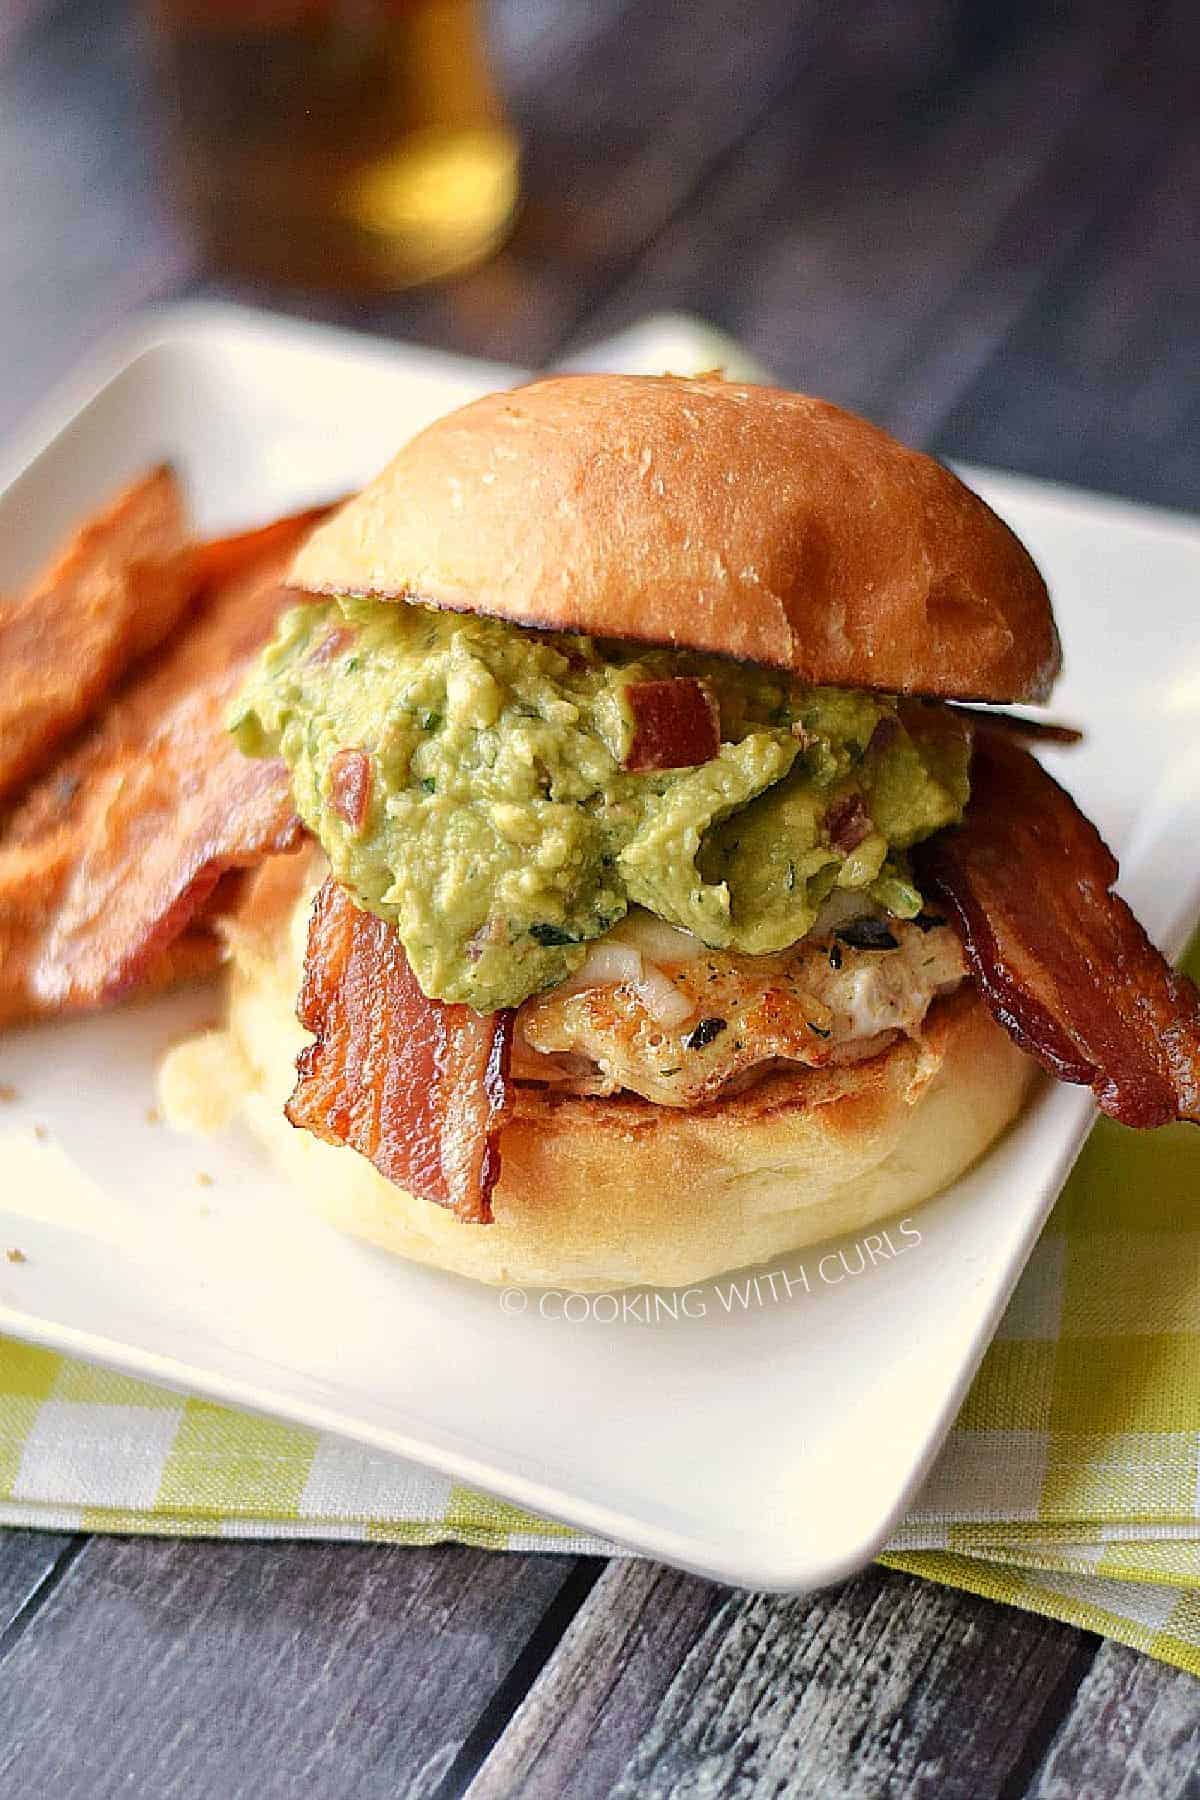 Chicken breast topped with melted cheese, bacon slices, and guacamole on a hamburger bun and sweet potato fries on the side.